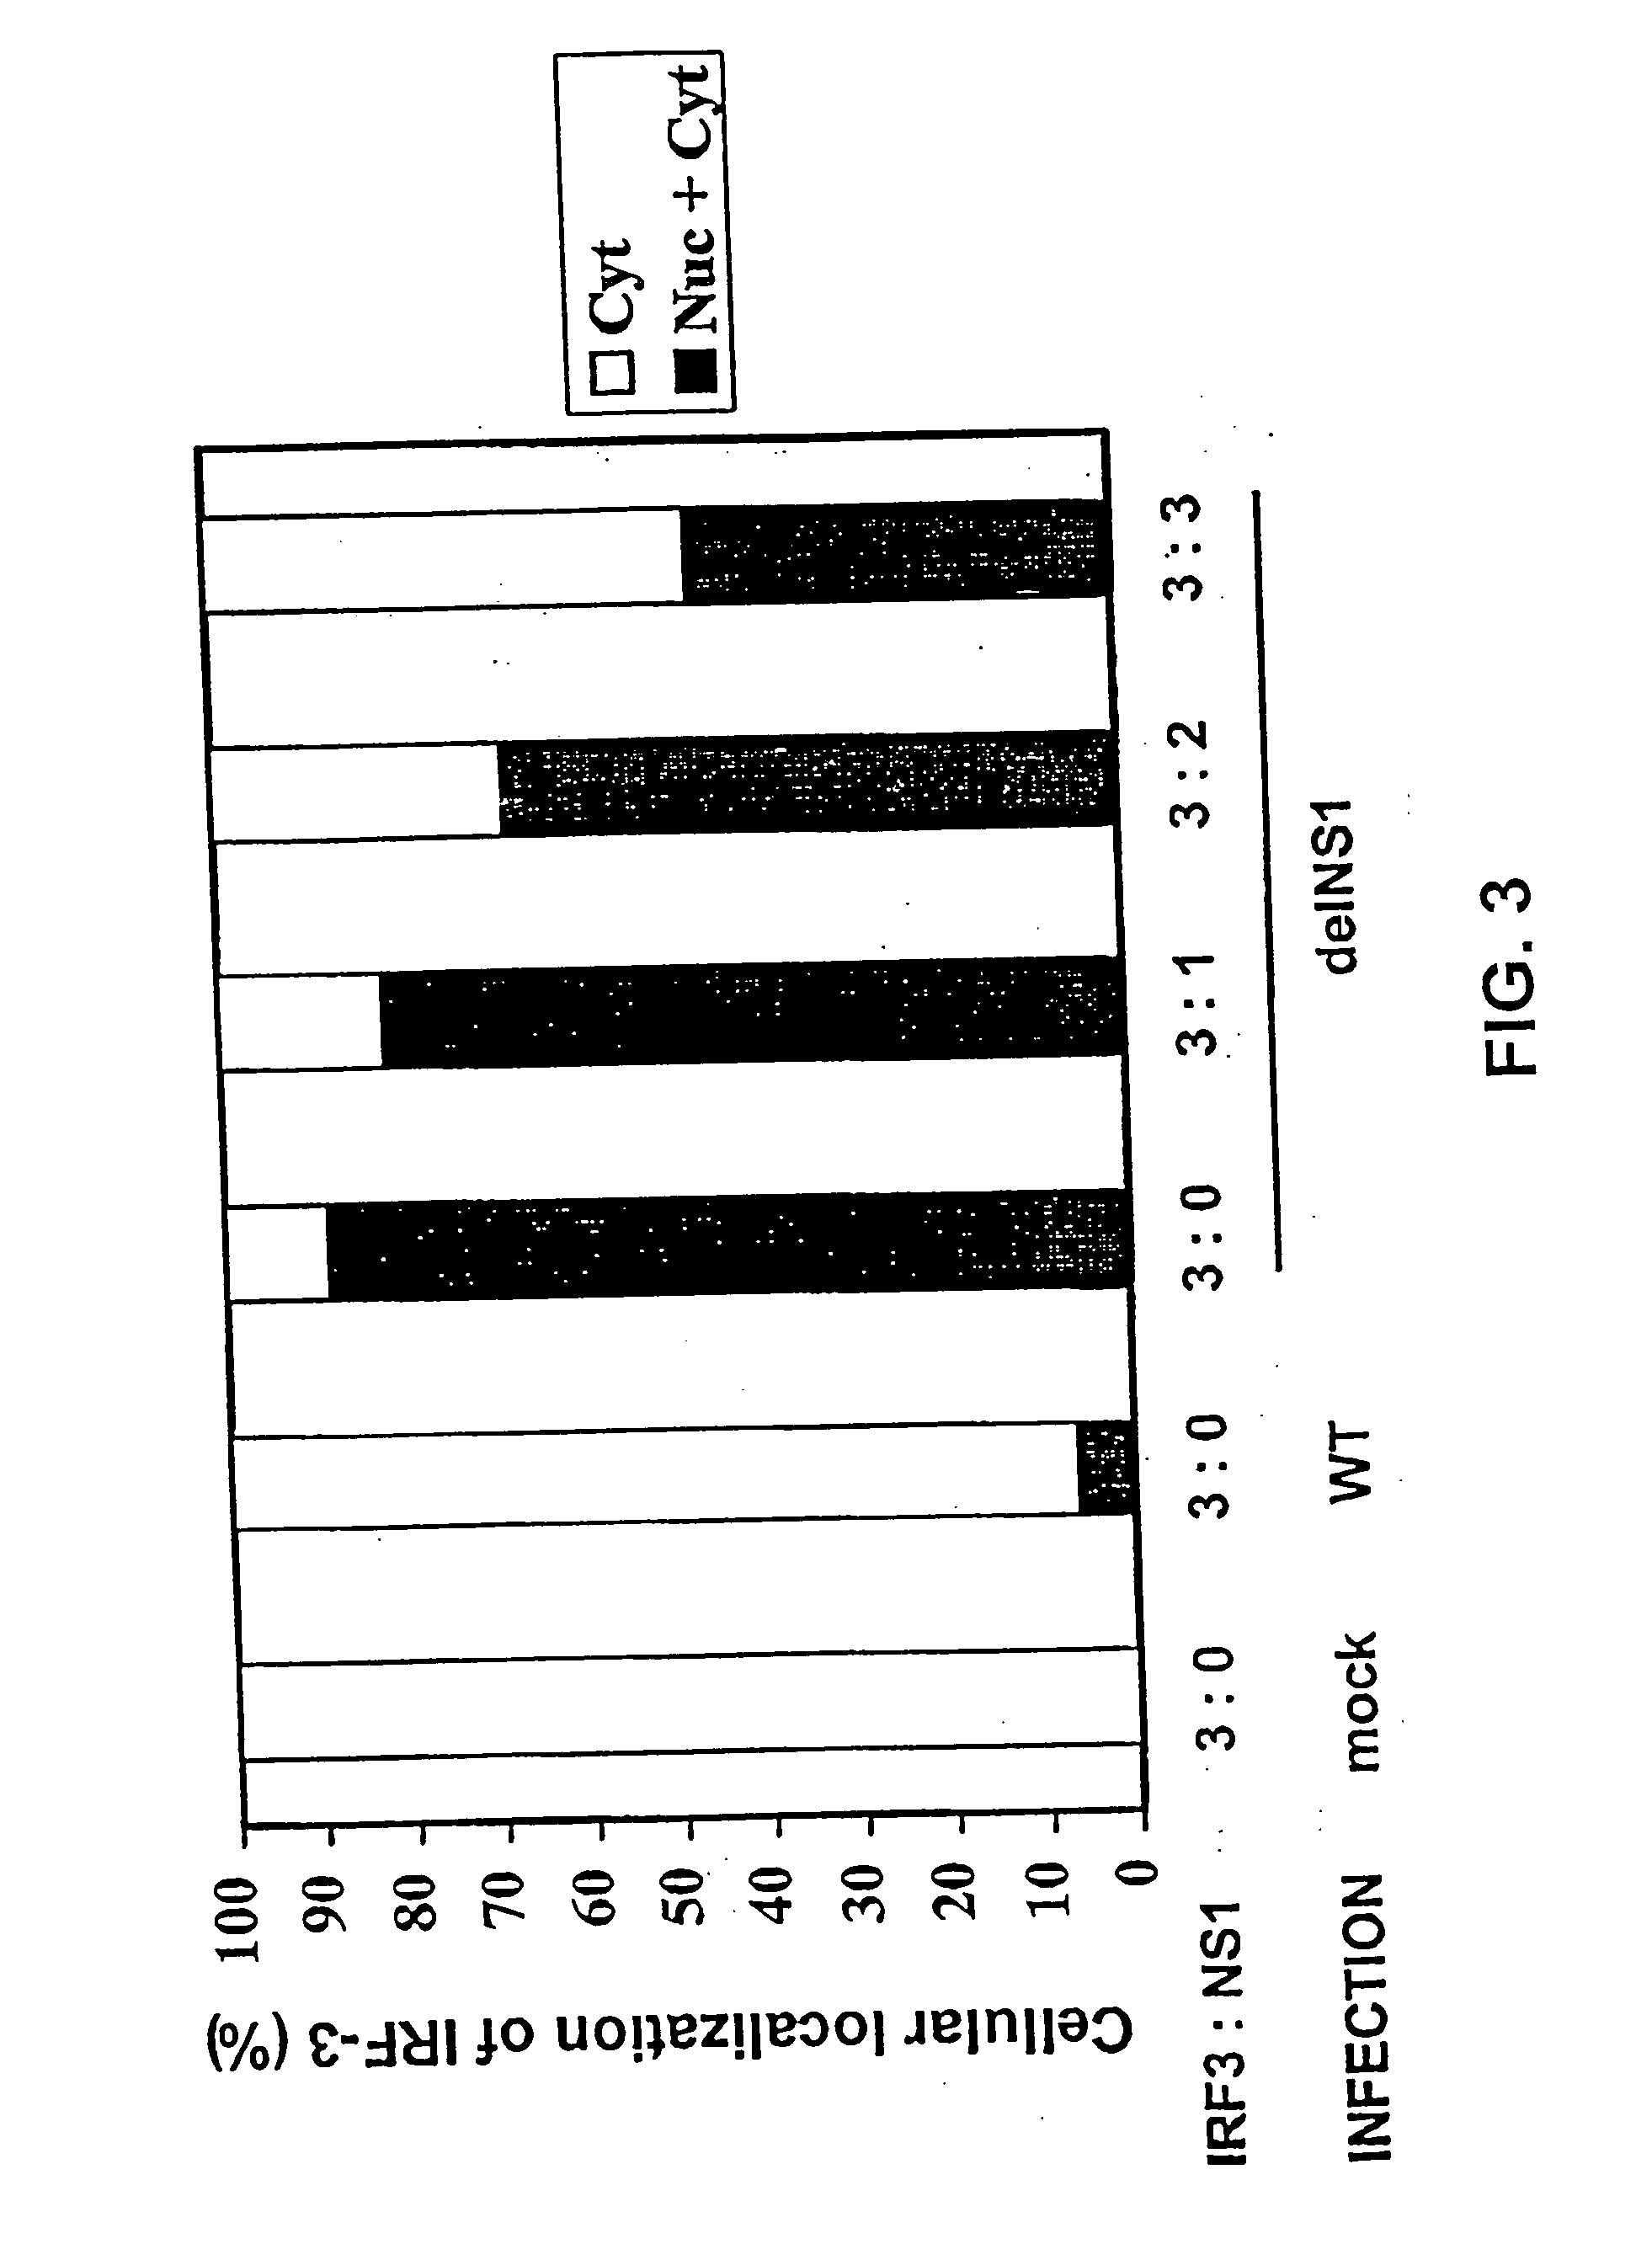 Attenuated negative strand viruses with altered interferon antagonist activity for use as vaccines and pharmaceuticals